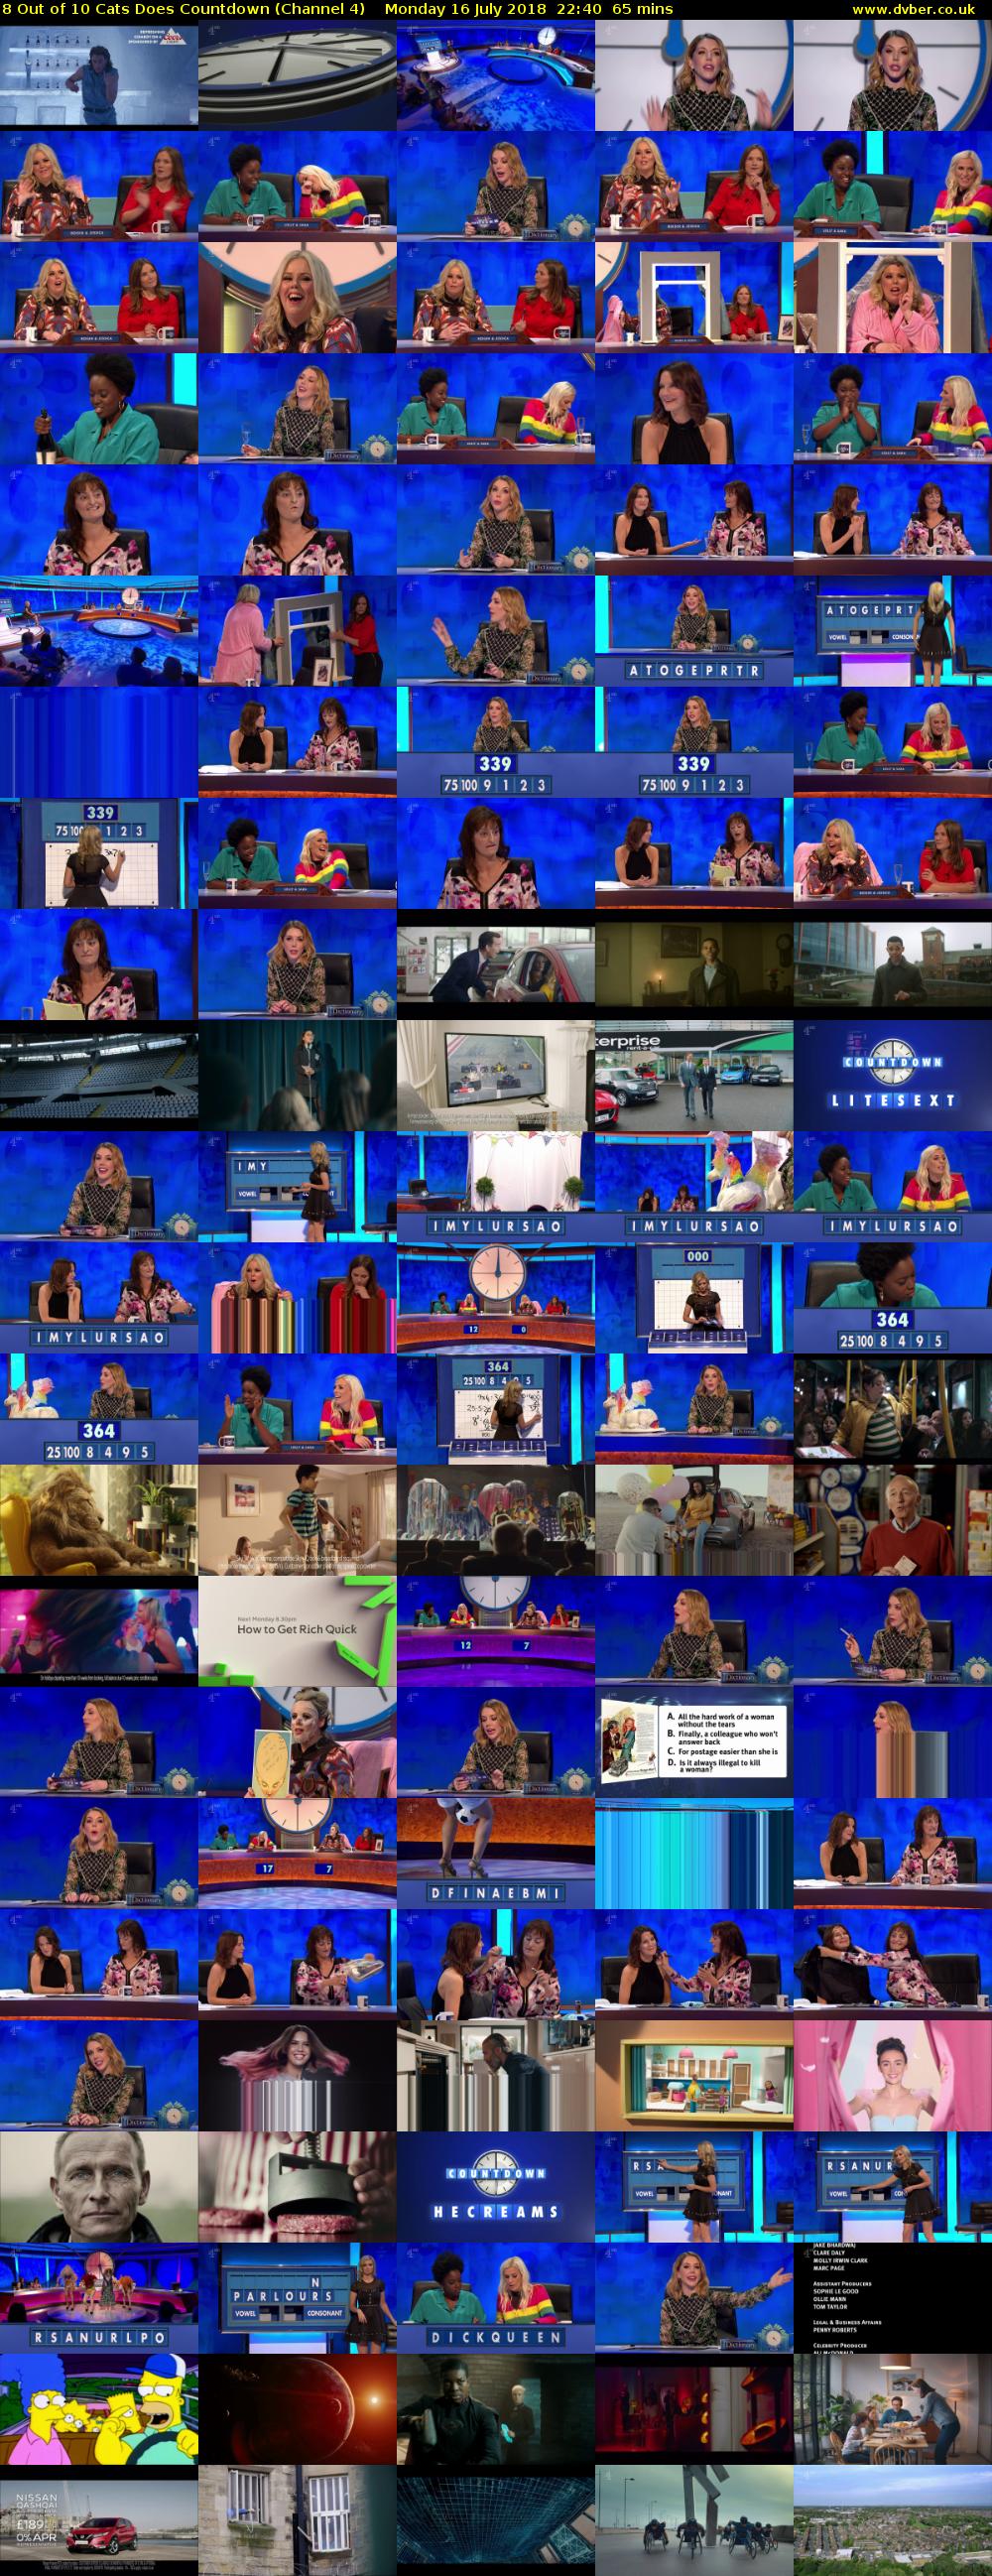 8 Out of 10 Cats Does Countdown (Channel 4) Monday 16 July 2018 22:40 - 23:45